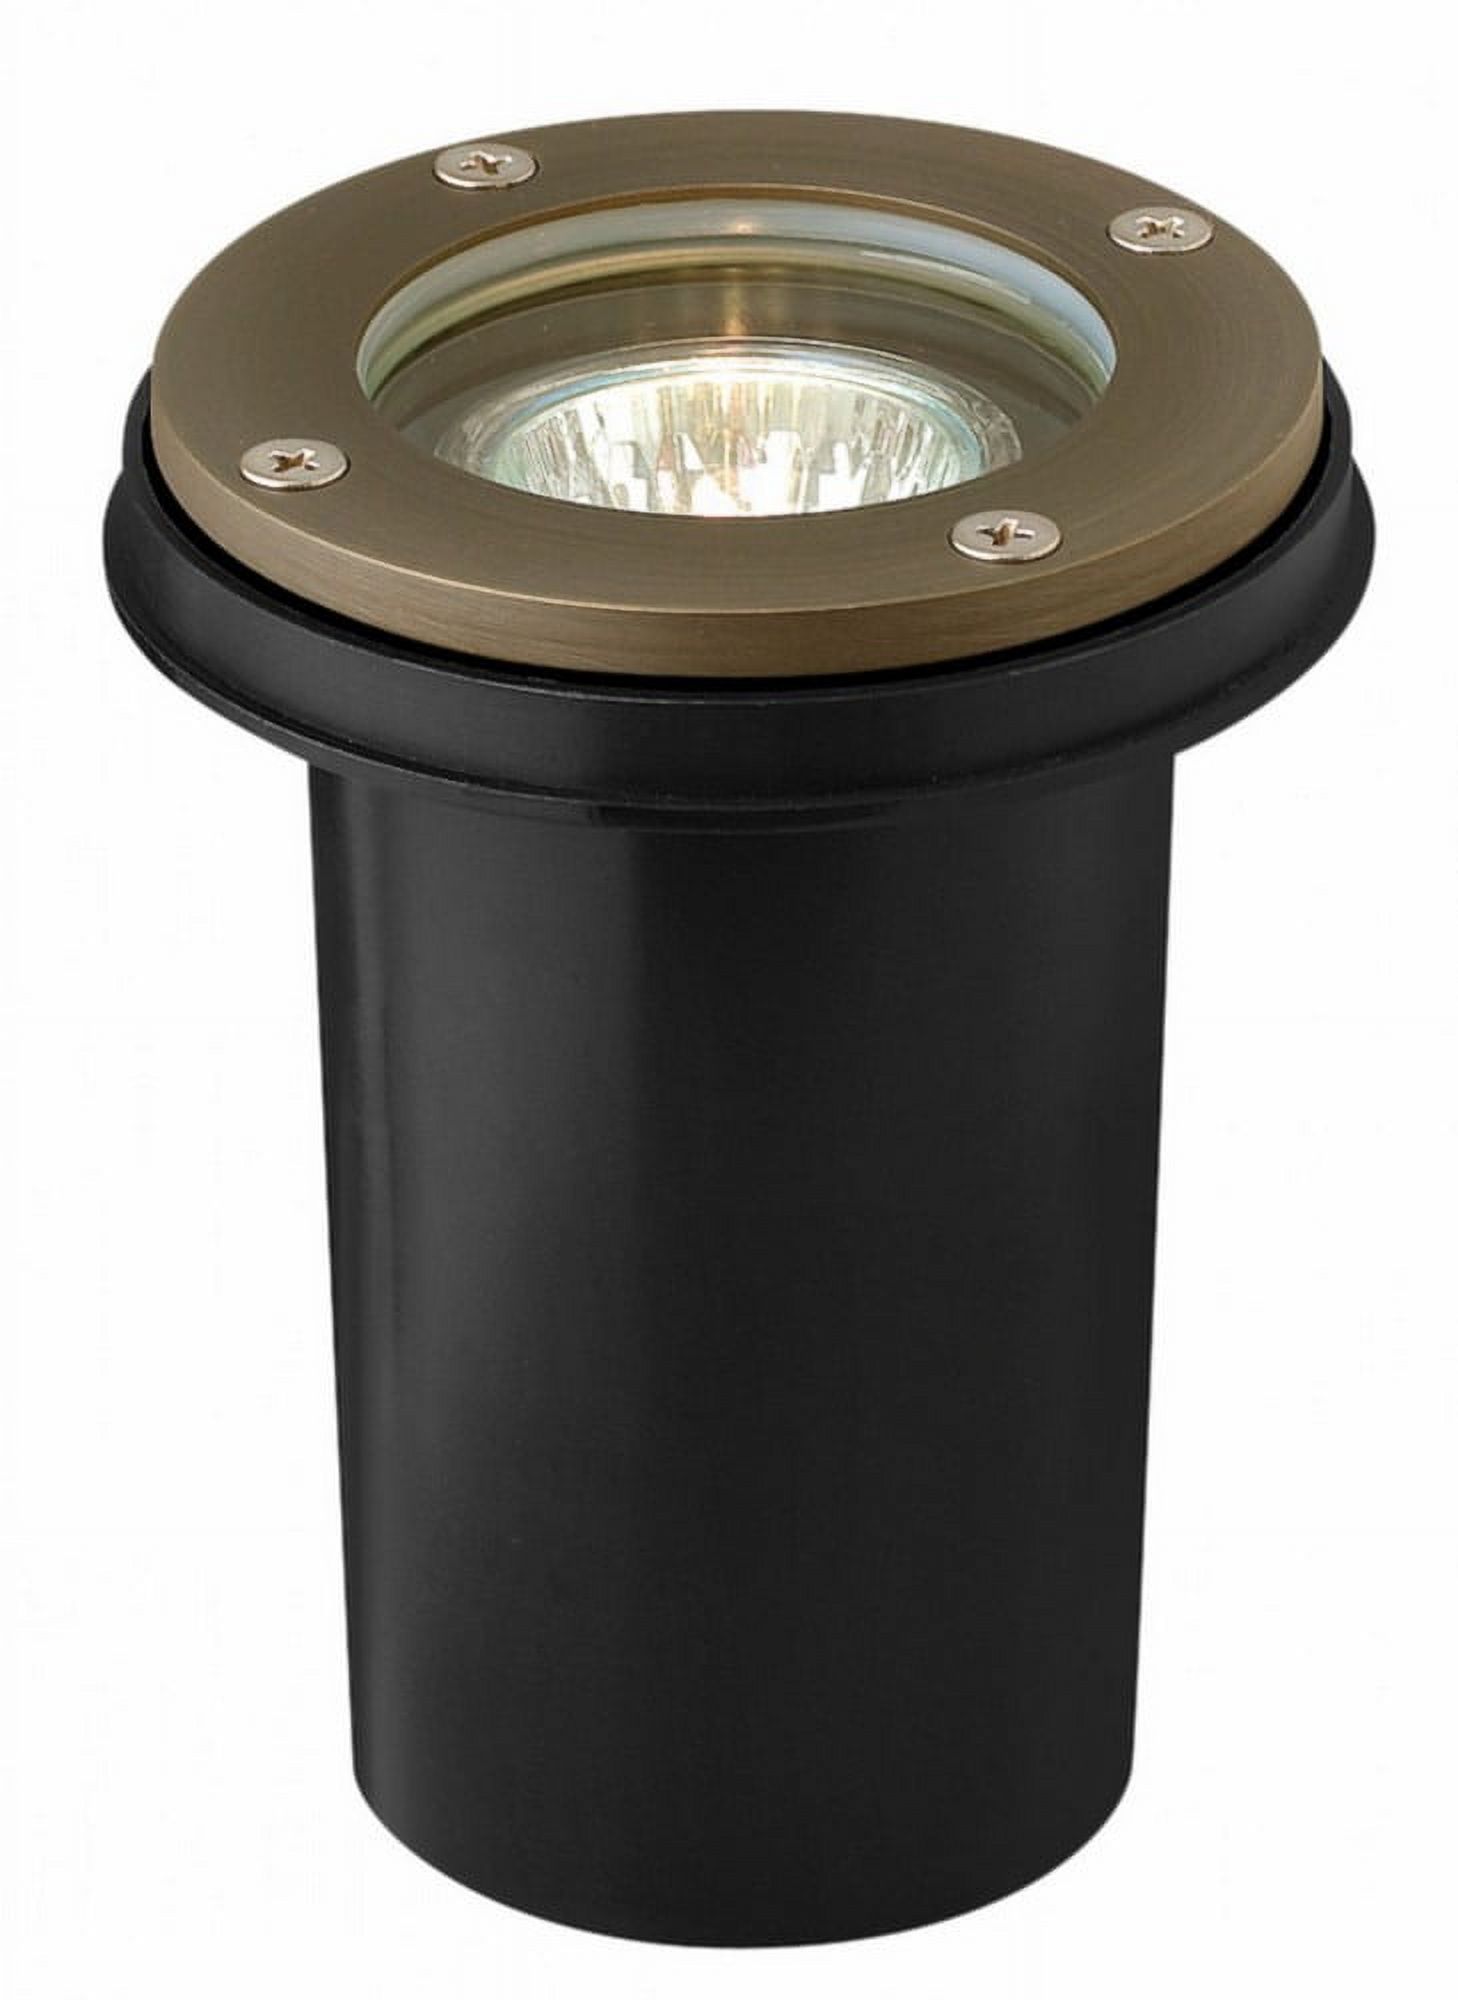 Hinkley Lighting - One Light Landscape Well - Hardy Island - Low Voltage One - image 1 of 6